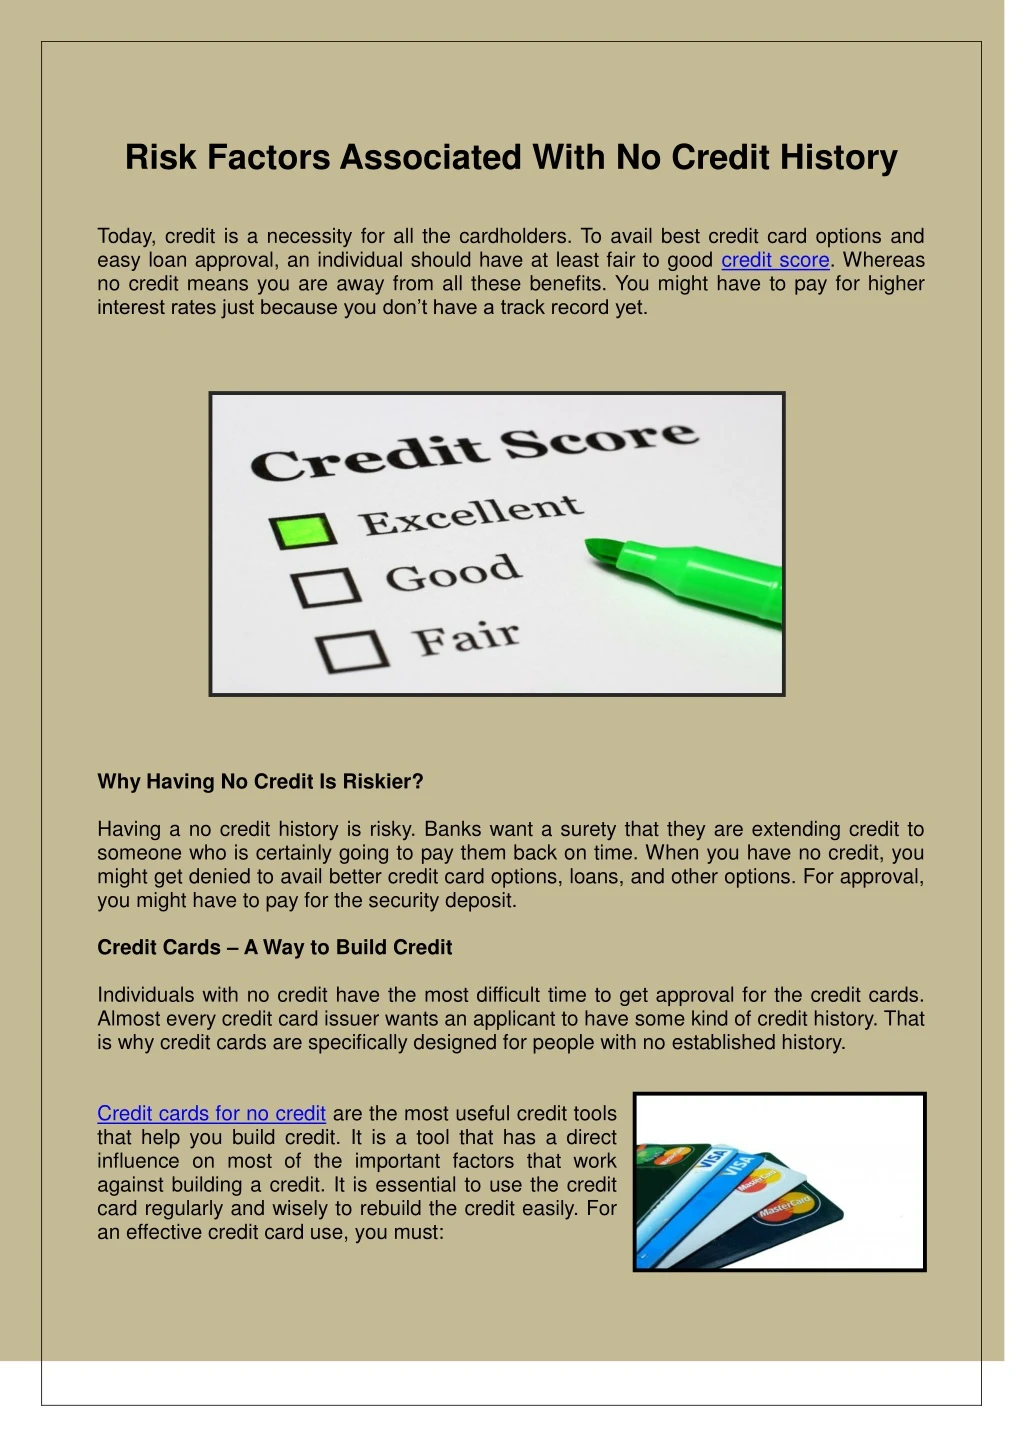 risk factors associated with no credit history